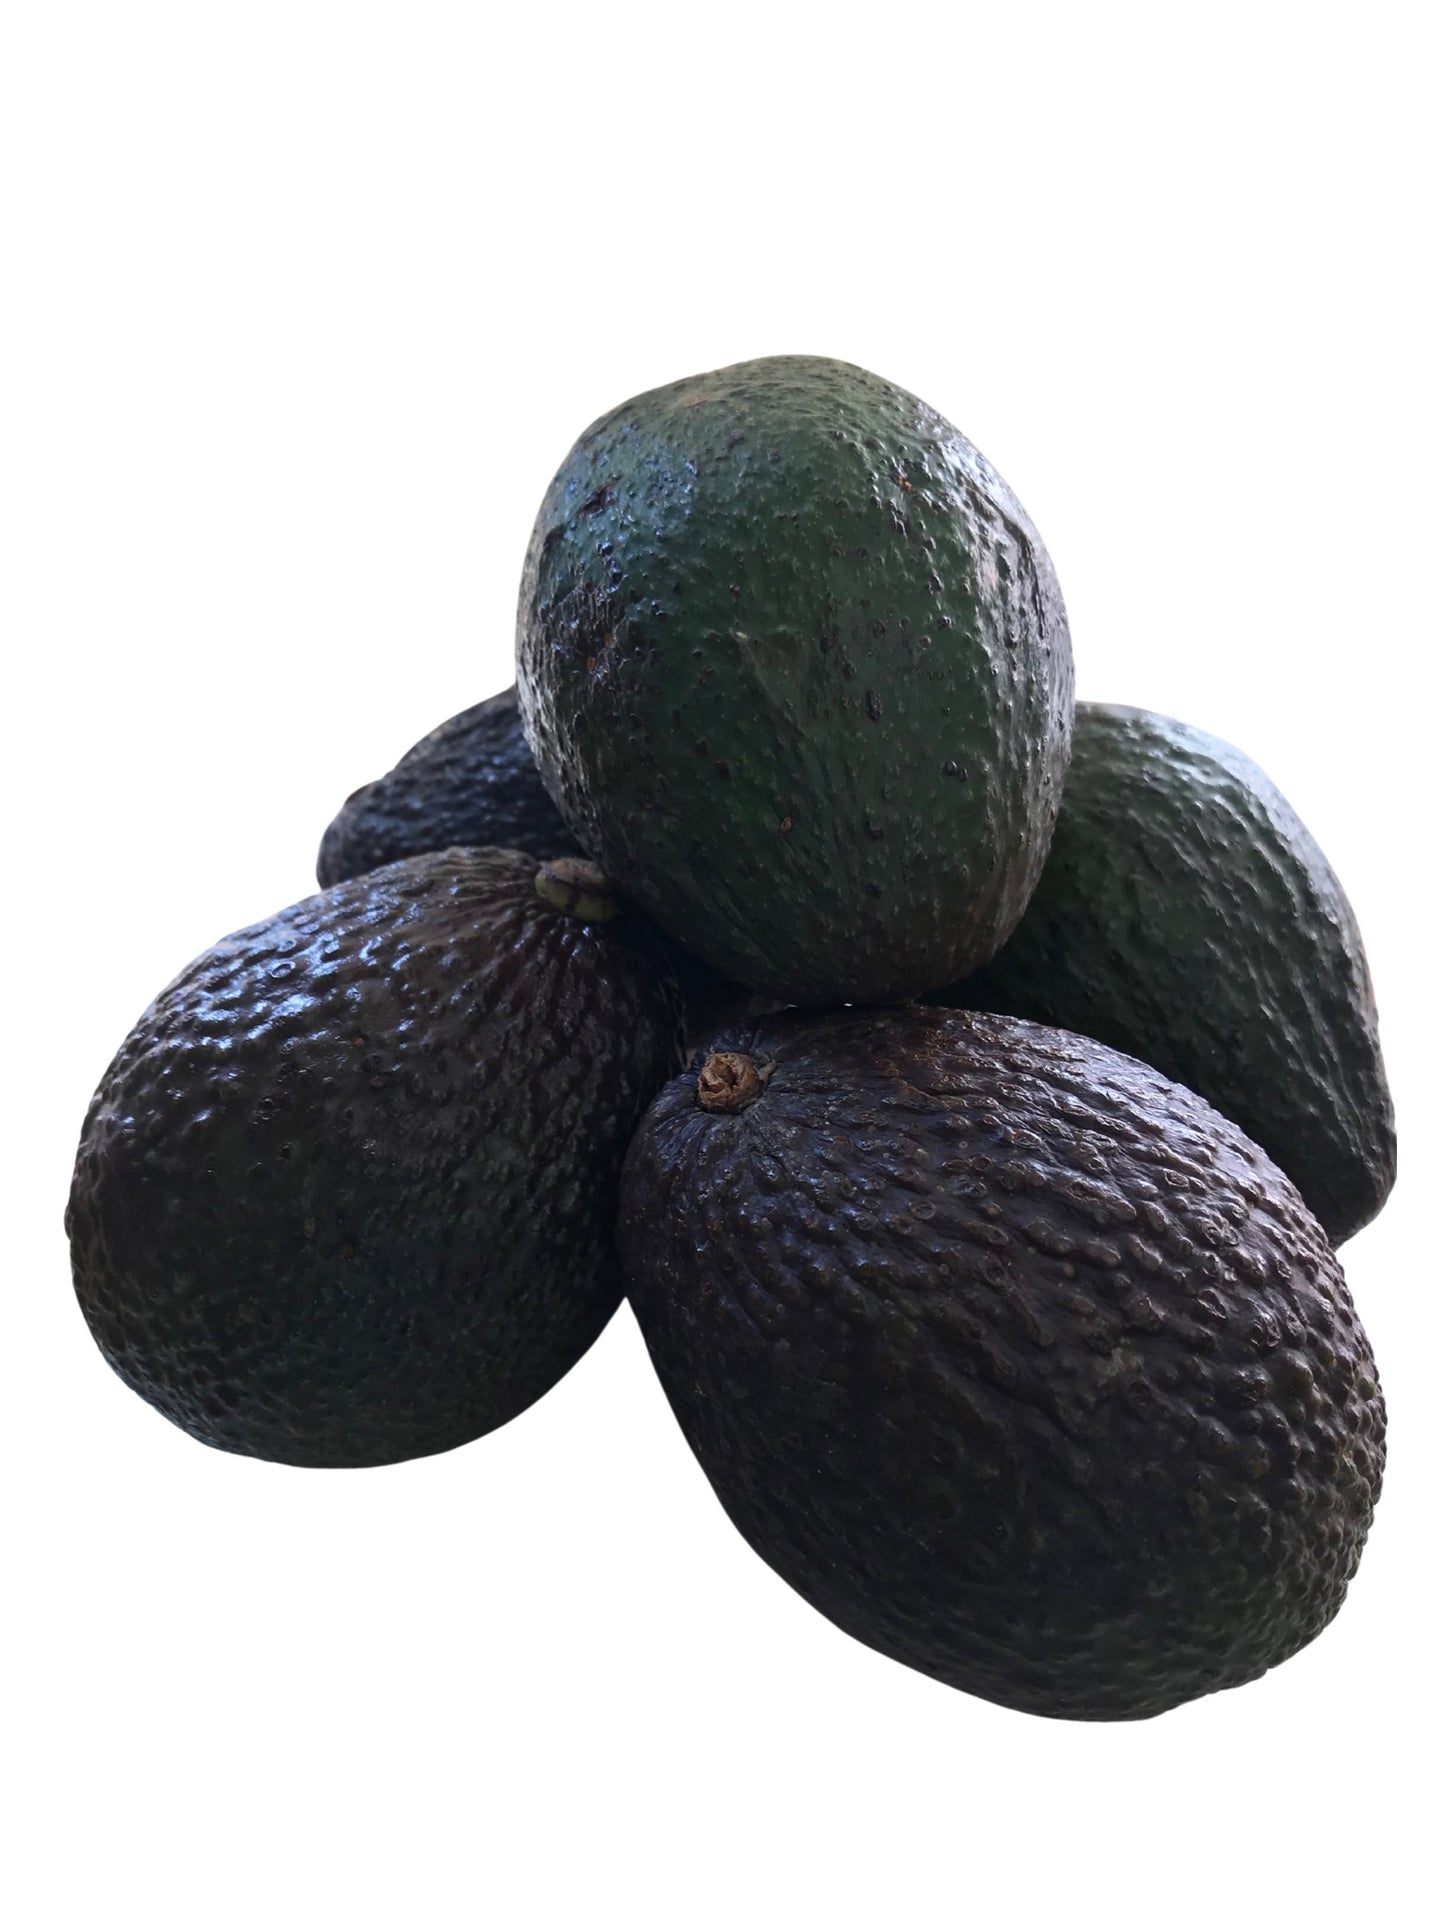 Aguacate Hass orgánico x Unidad